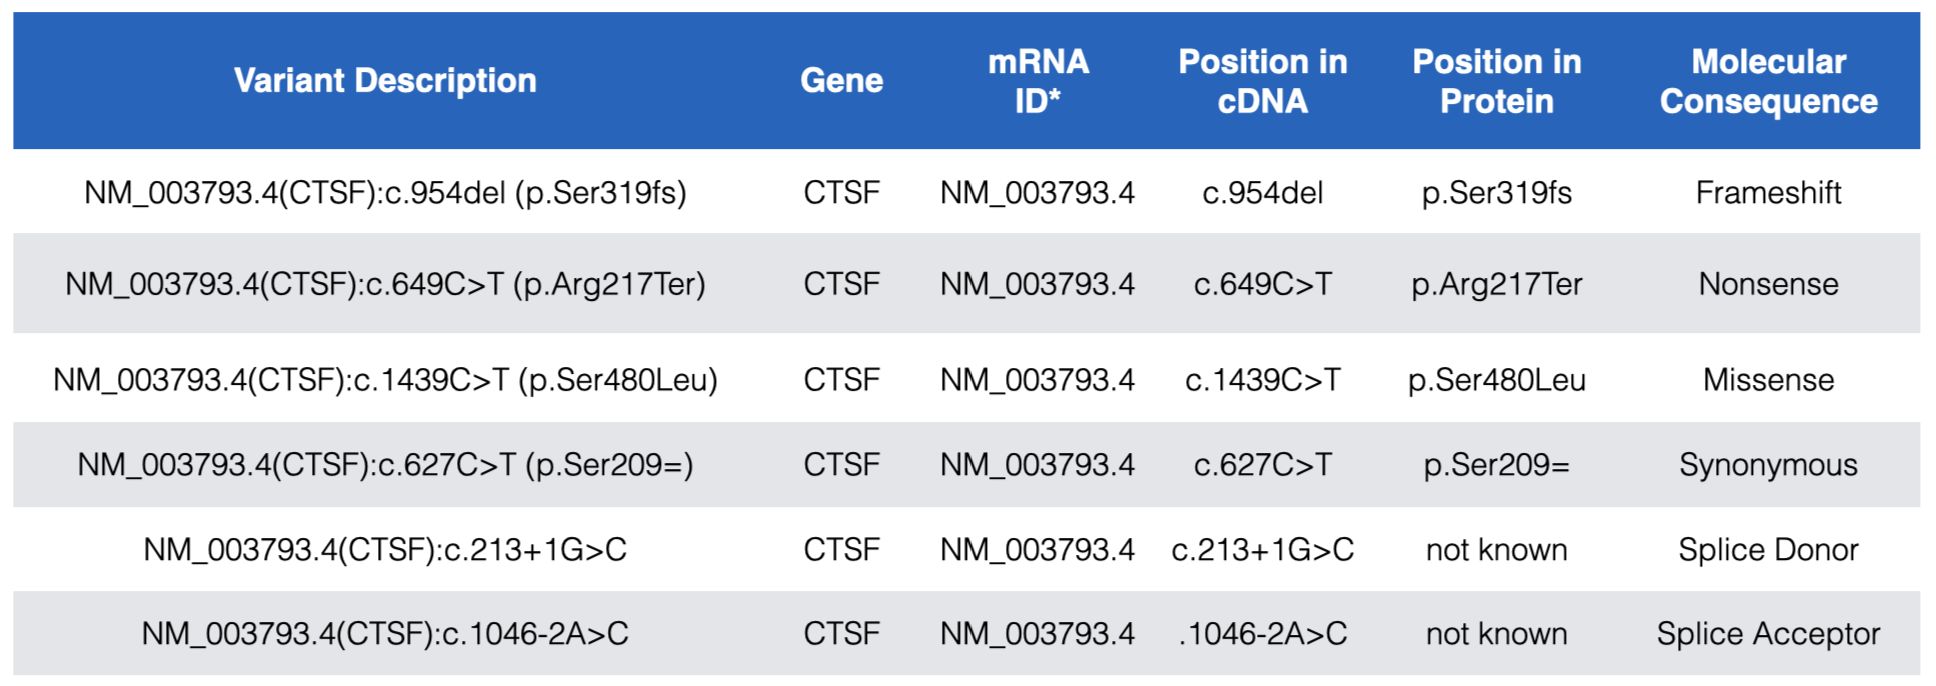 Examples of the most common DNA variants and how the Variant description explains where each maps within the gene, mRNA (cDNA) and protein. In the **Variant Description** and **Position in Protein** columns, Ter=termination and the equal sign indicates no change. Also notice that while splice site variants do not map to coding sequence they are still described relative to a position in the cDNA. See text for more details.